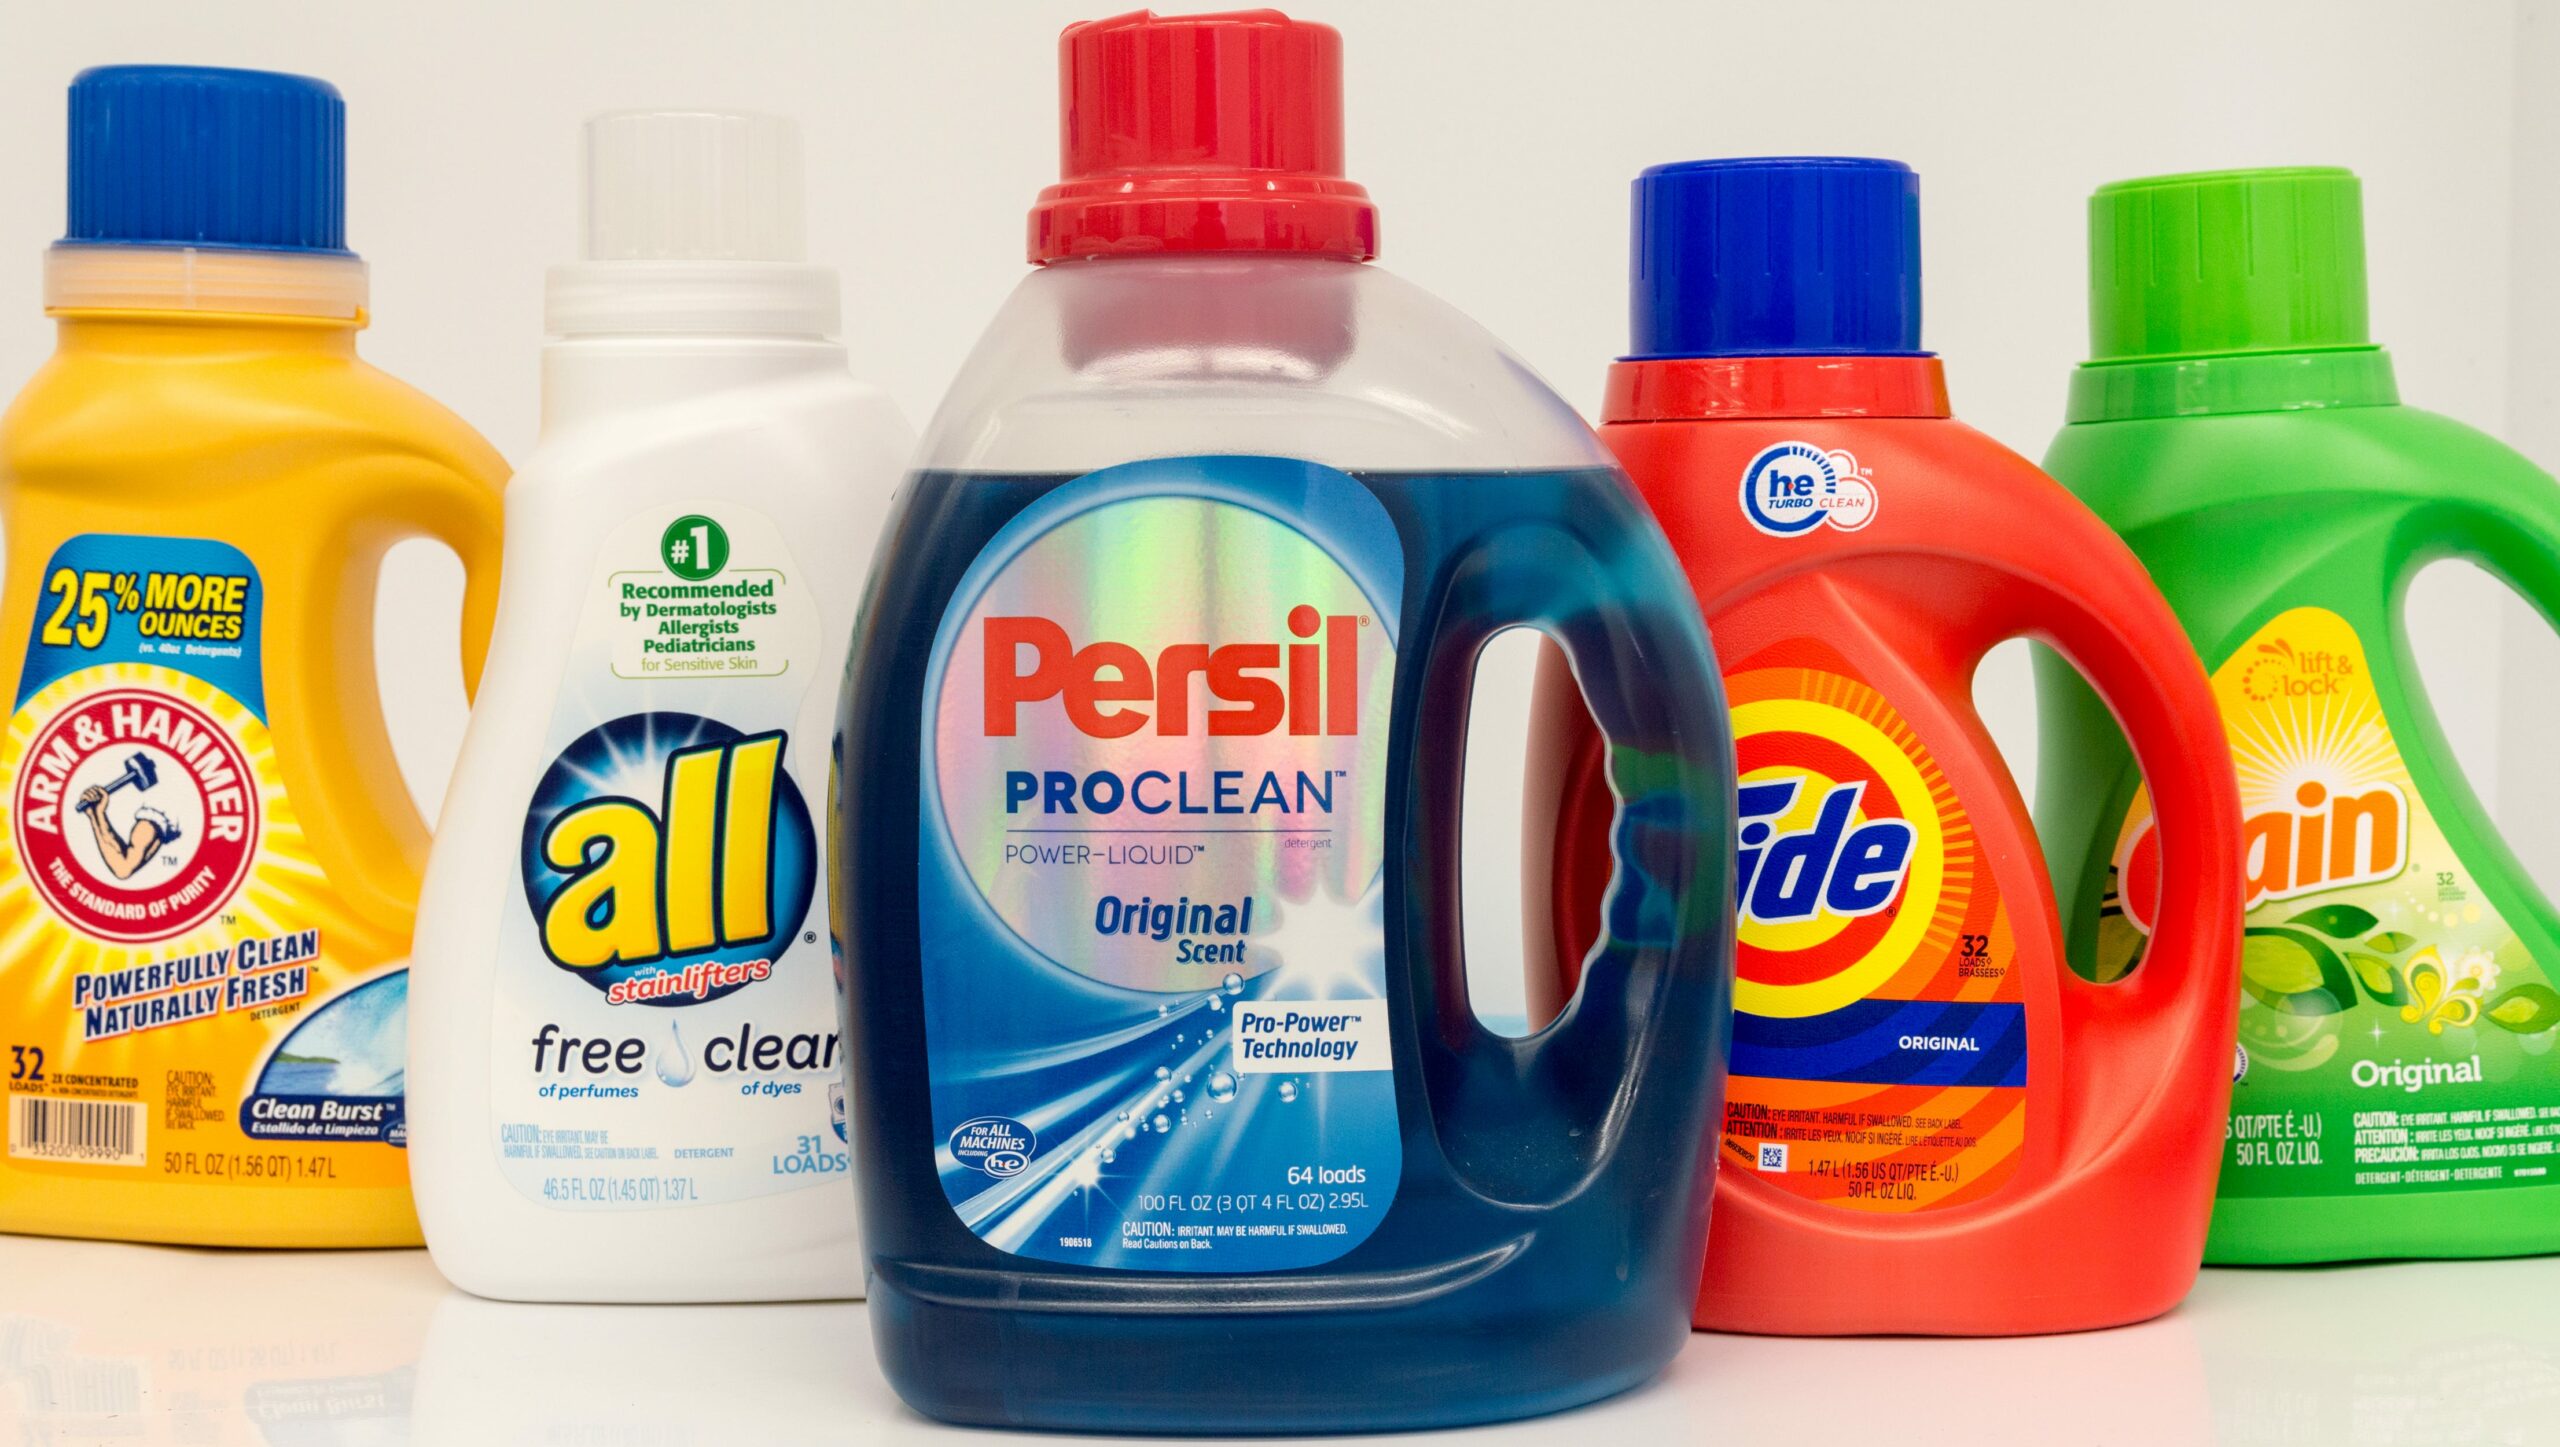 Can I Use Laundry Detergent to Clean Carpet?